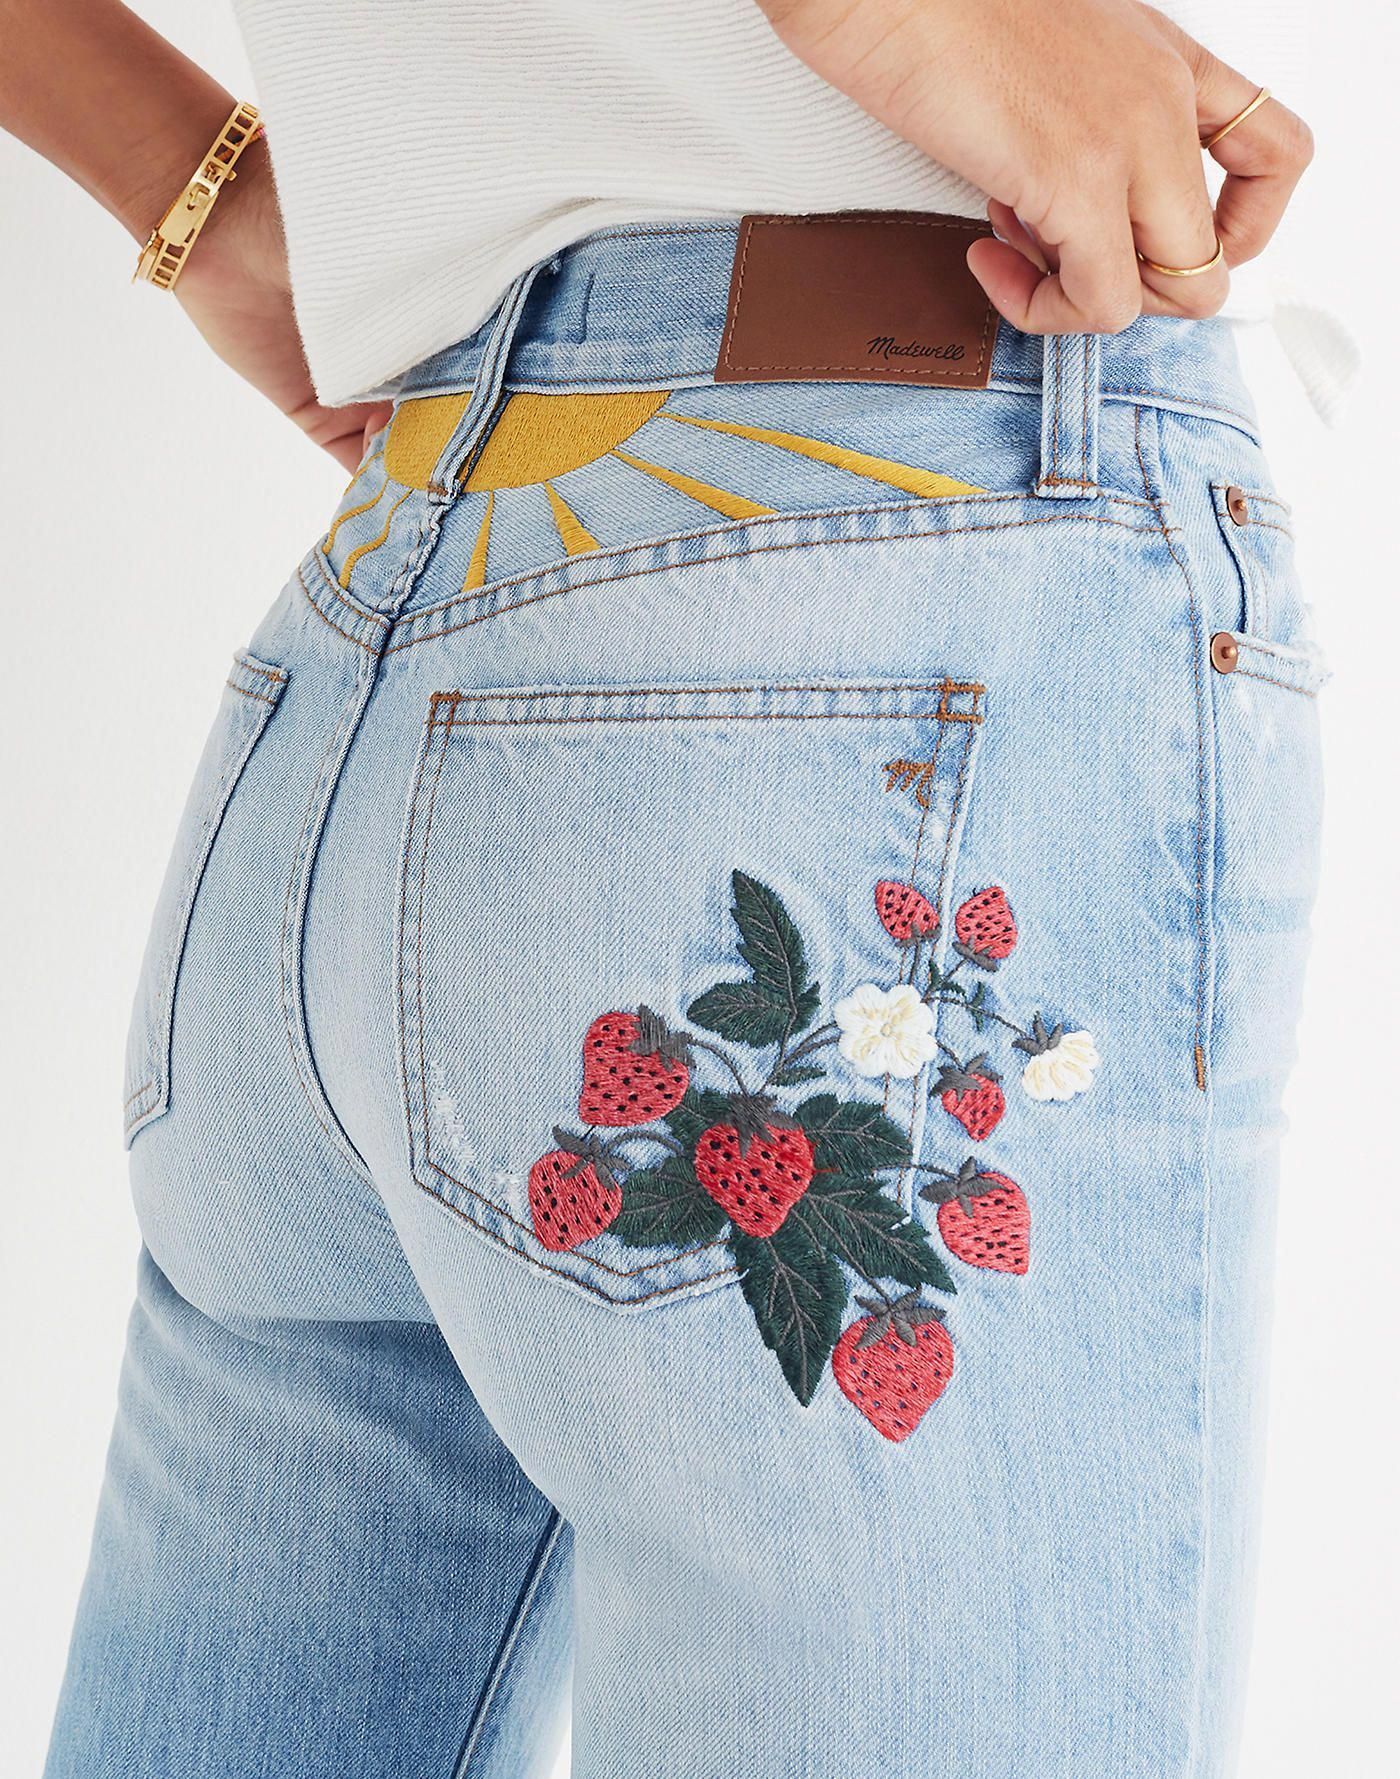 The Tall Perfect Summer Jean: Strawberry Embroidered Edition - The Tall Perfect Summer Jean: Strawberry Embroidered Edition -   8 style Jeans school ideas